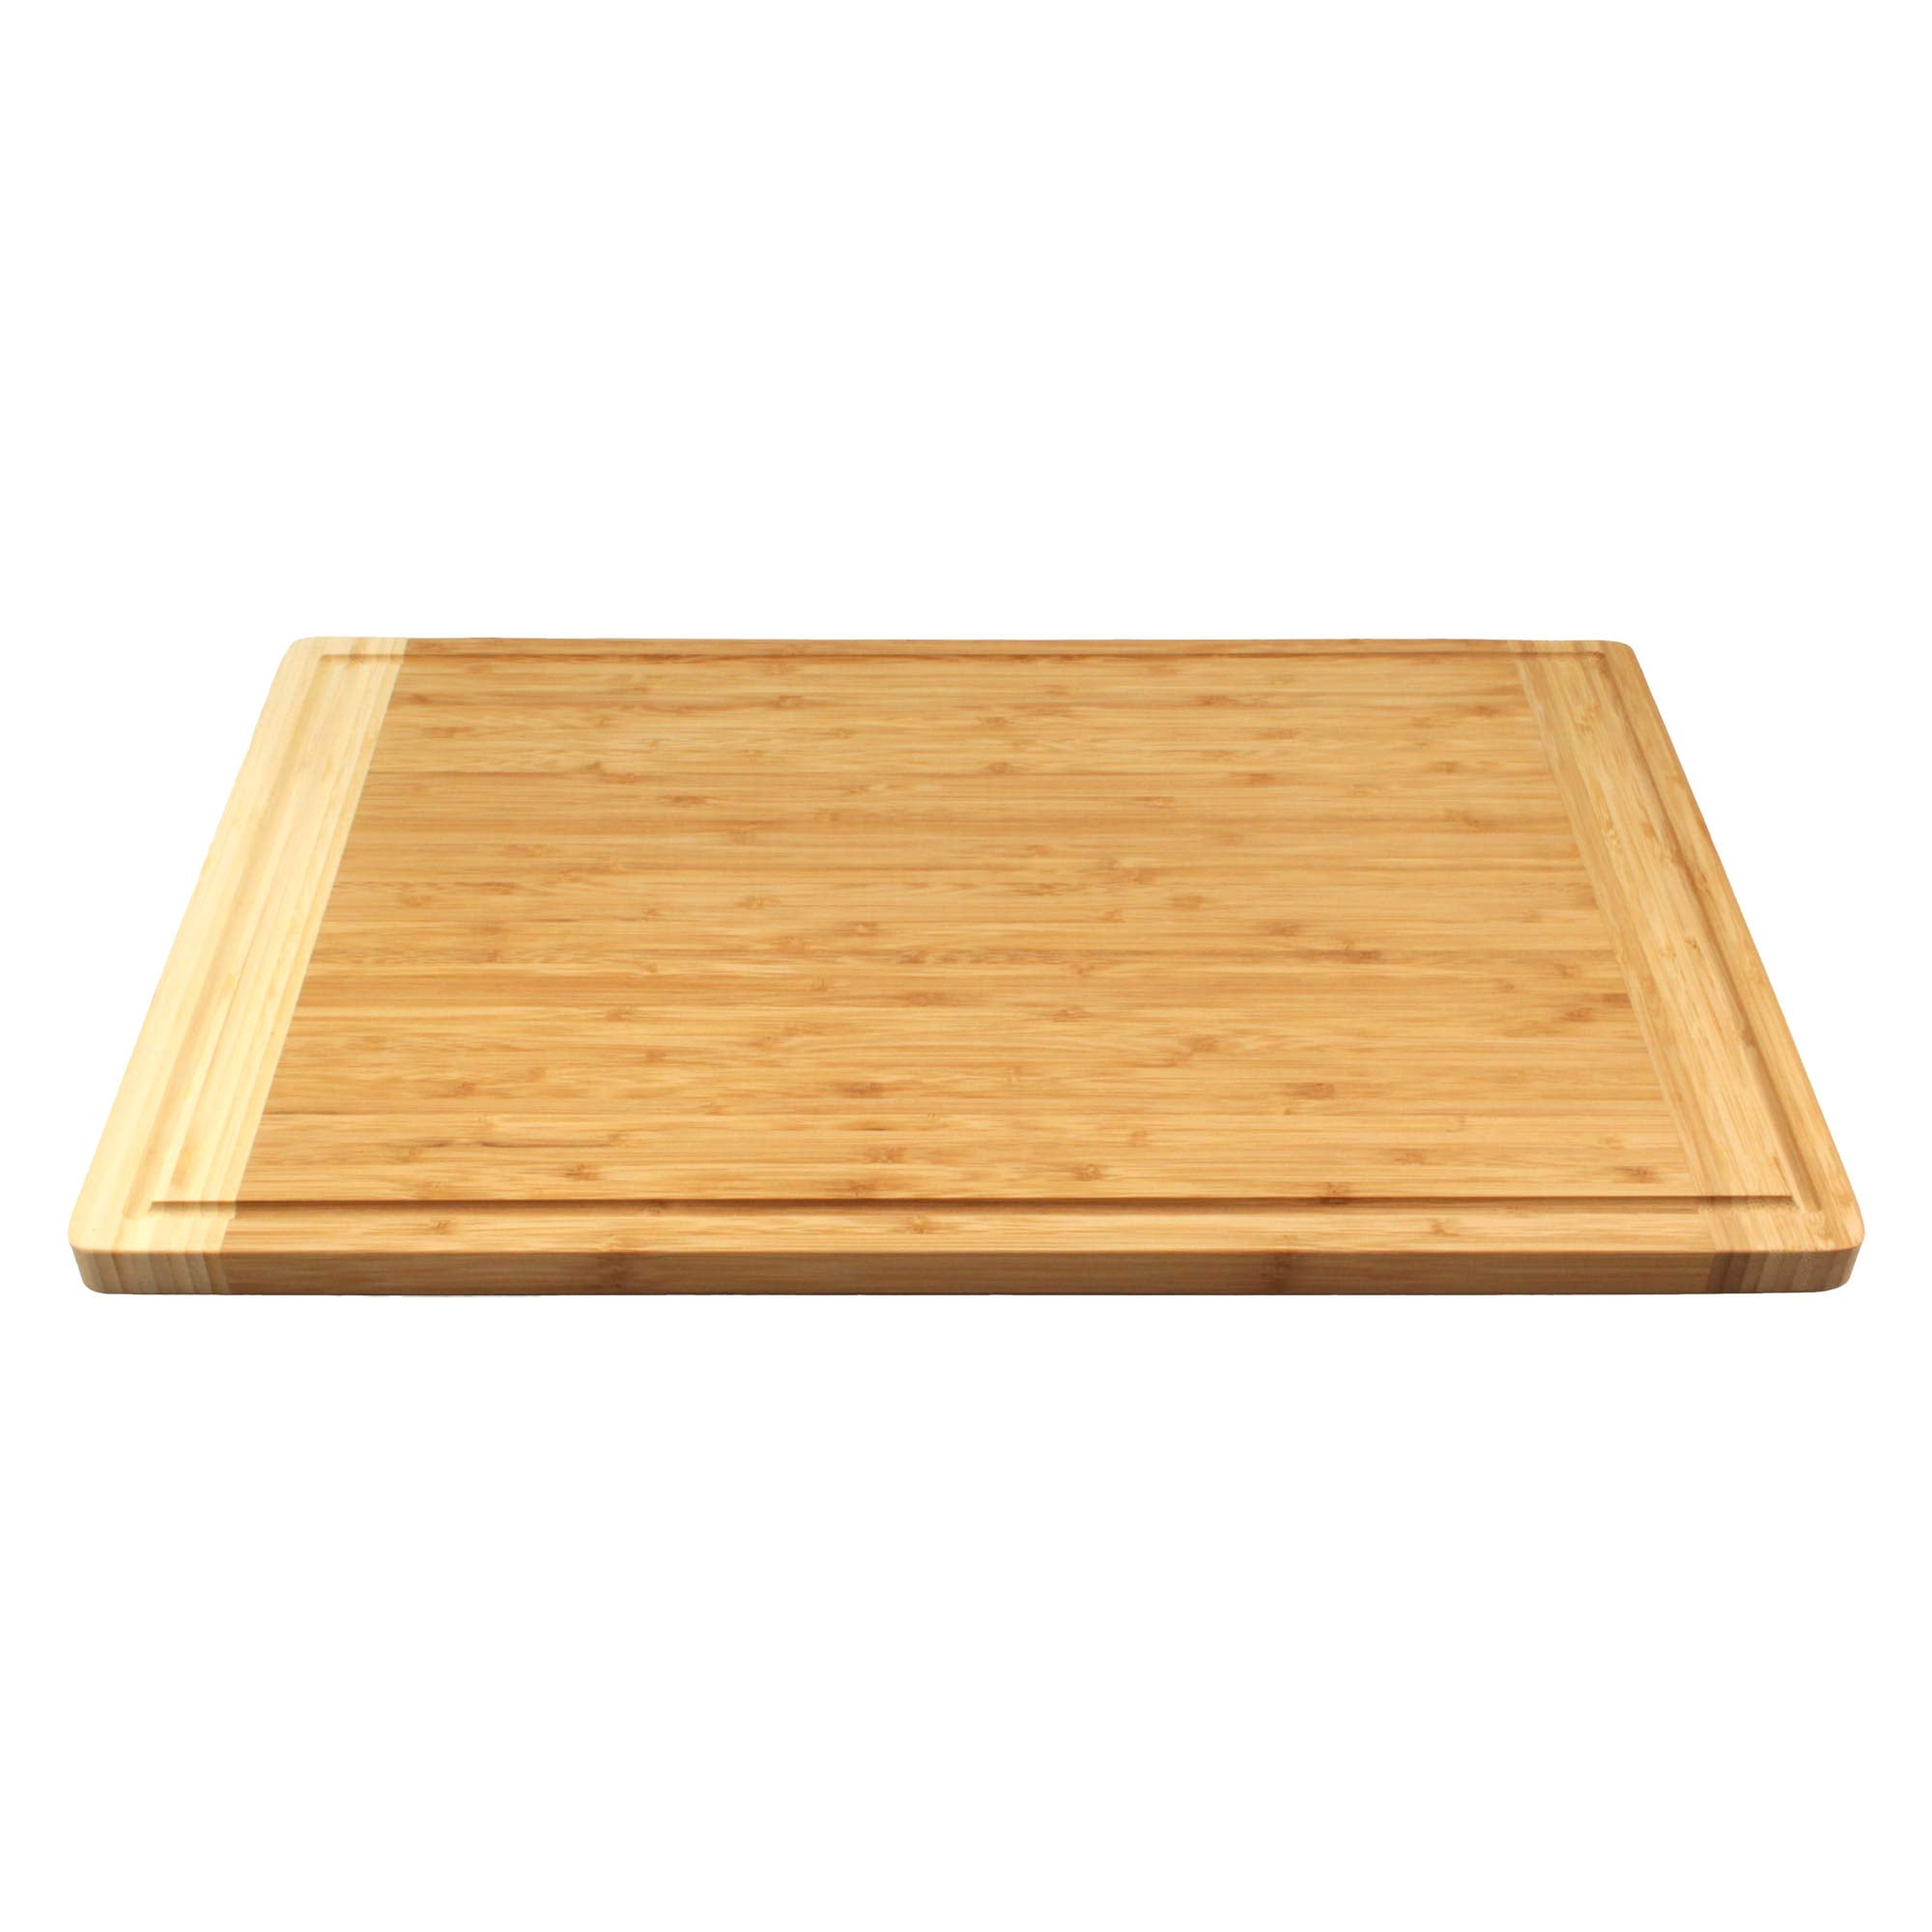 Ultra Cuisine Reversible Large Wood Cutting Board - Large Bread Cutting  Board - Charcuterie and Pastry Board with Lip - Kneading Board - Large Thin